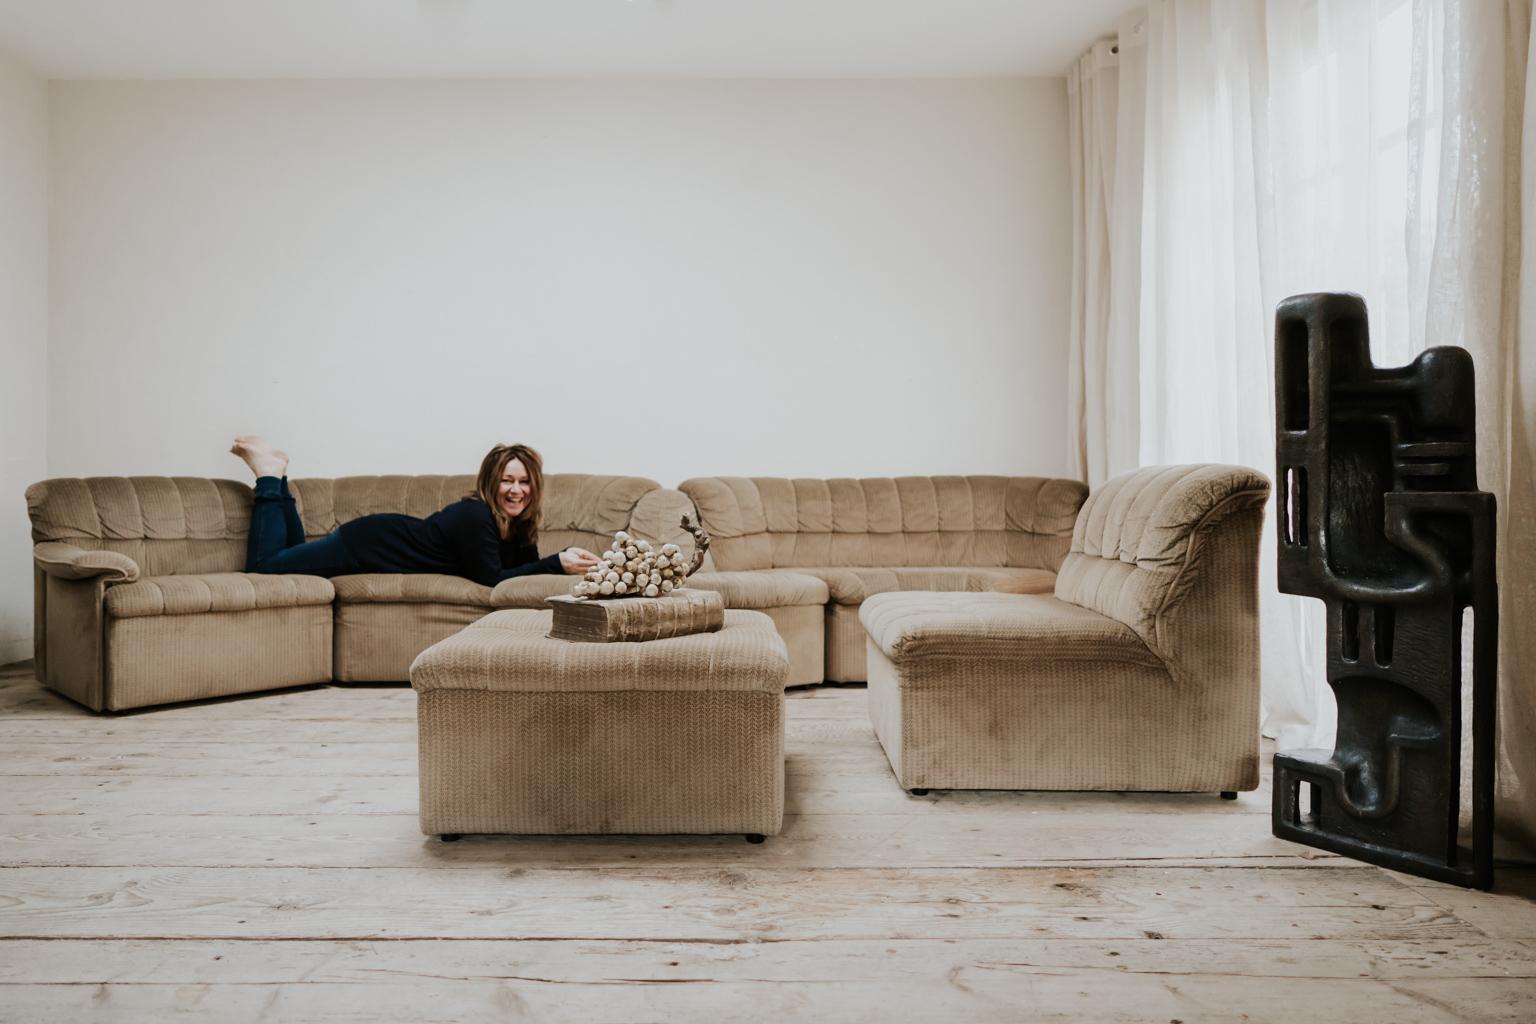 Designed by Laauser, this 1970s comfy sectional sofa has
a big corner 86 x 163 cm wide x 75 cm high
a big corner 86 x 163 cm wide x 75 cm high
a small corner 115 cm wide x 85 cm deep and 68 cm high
a one seater with armrest 72 cm high/seat 37 cm